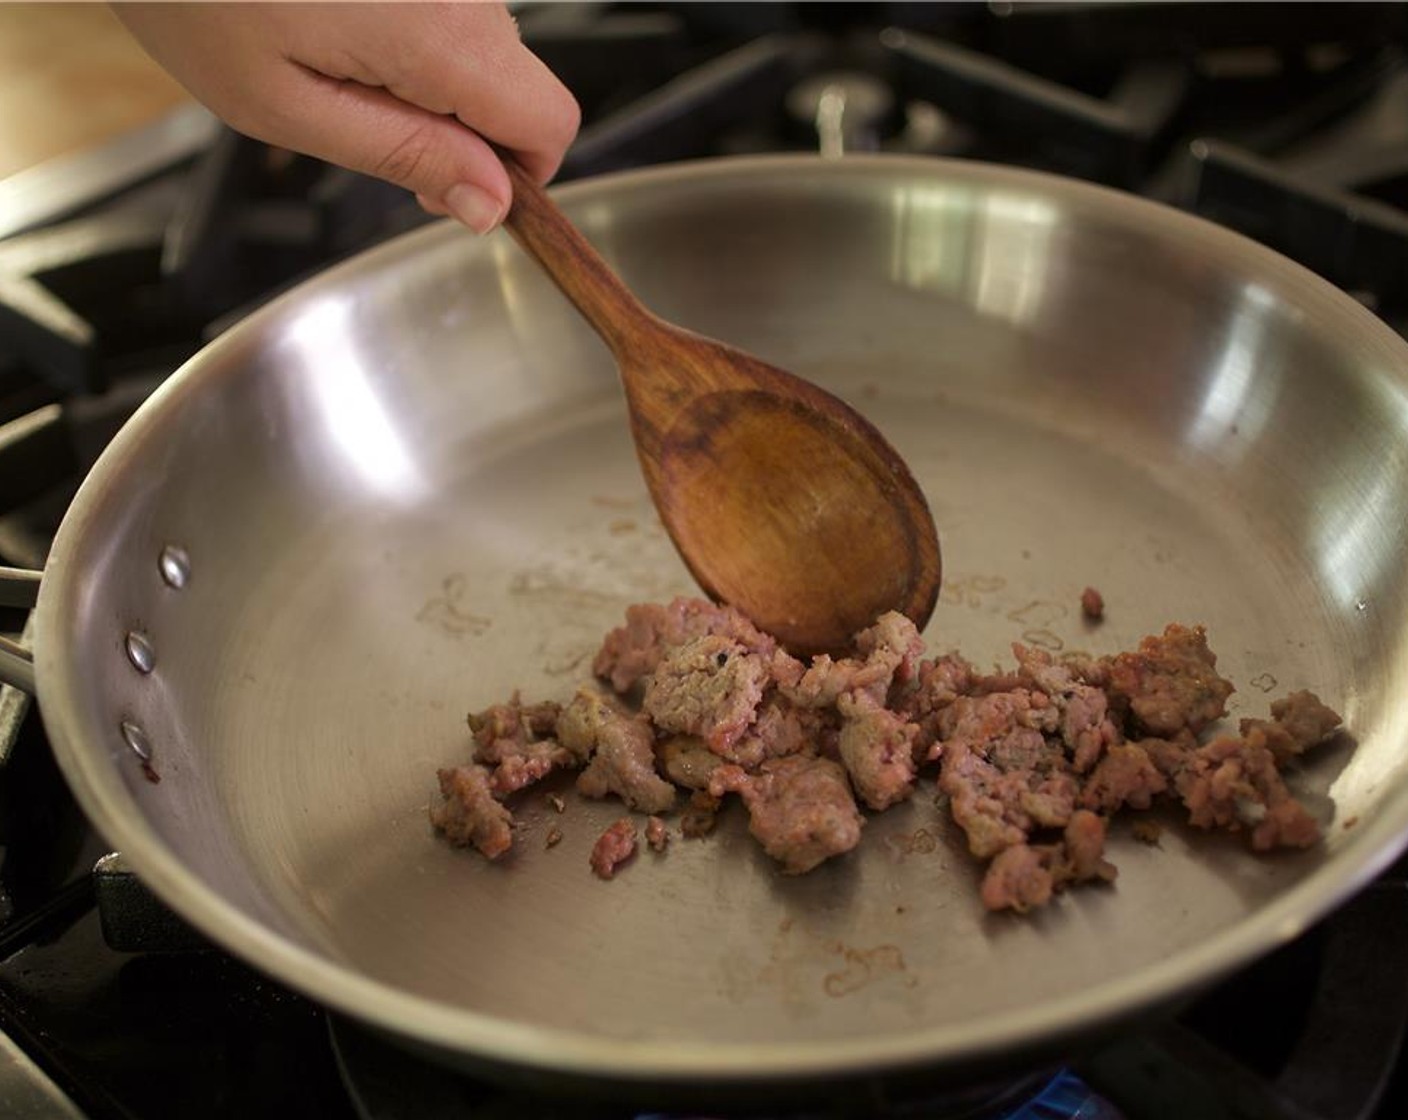 step 4 Meanwhile, heat a large saute pan over medium high heat. Add Olive Oil (1/2 tsp) to the pan and swirl pan evenly to coat the bottom. Remove casings from Turkey Sausage (1) and discard. Carefully add sausage to pan and cook for three minutes, breaking up with a spoon.